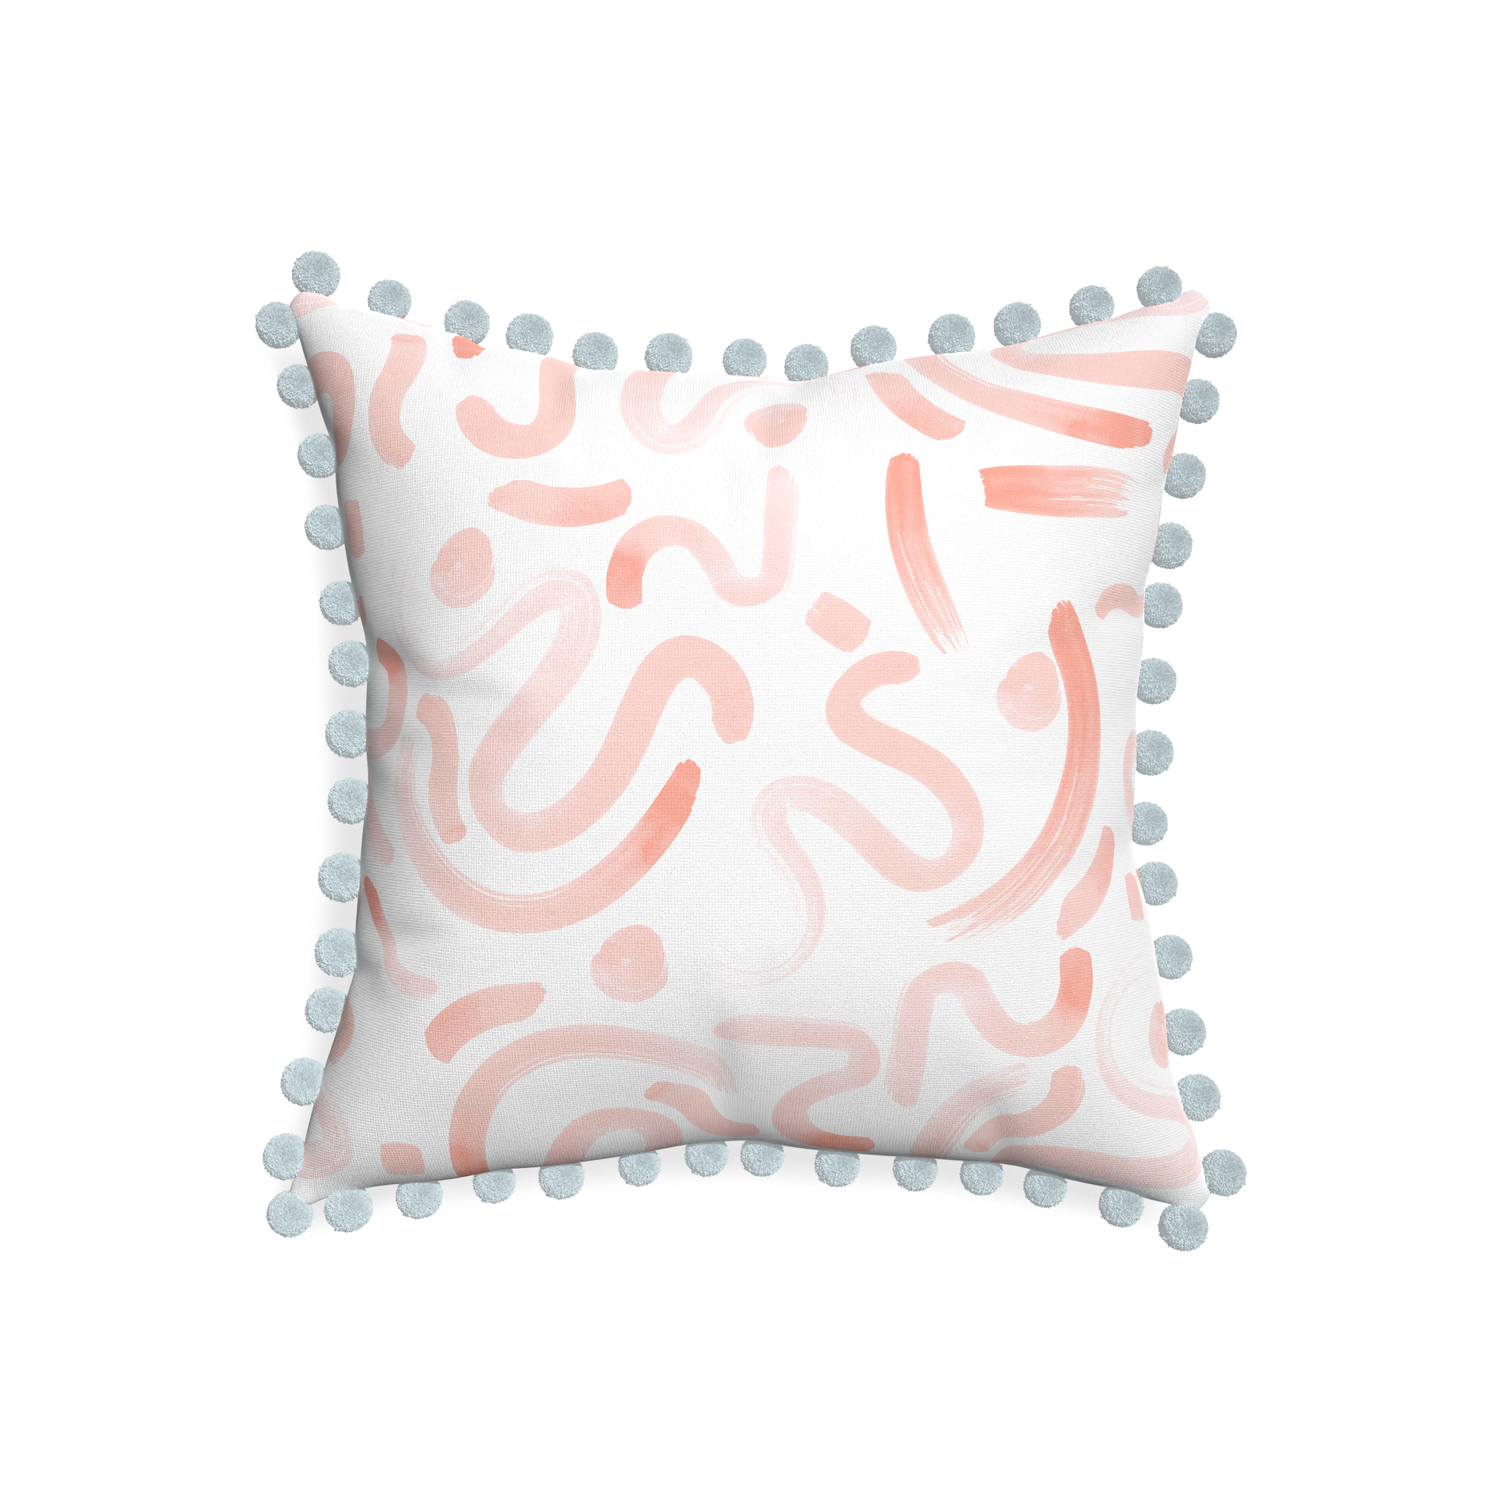 20-square hockney pink custom pink graphicpillow with powder pom pom on white background